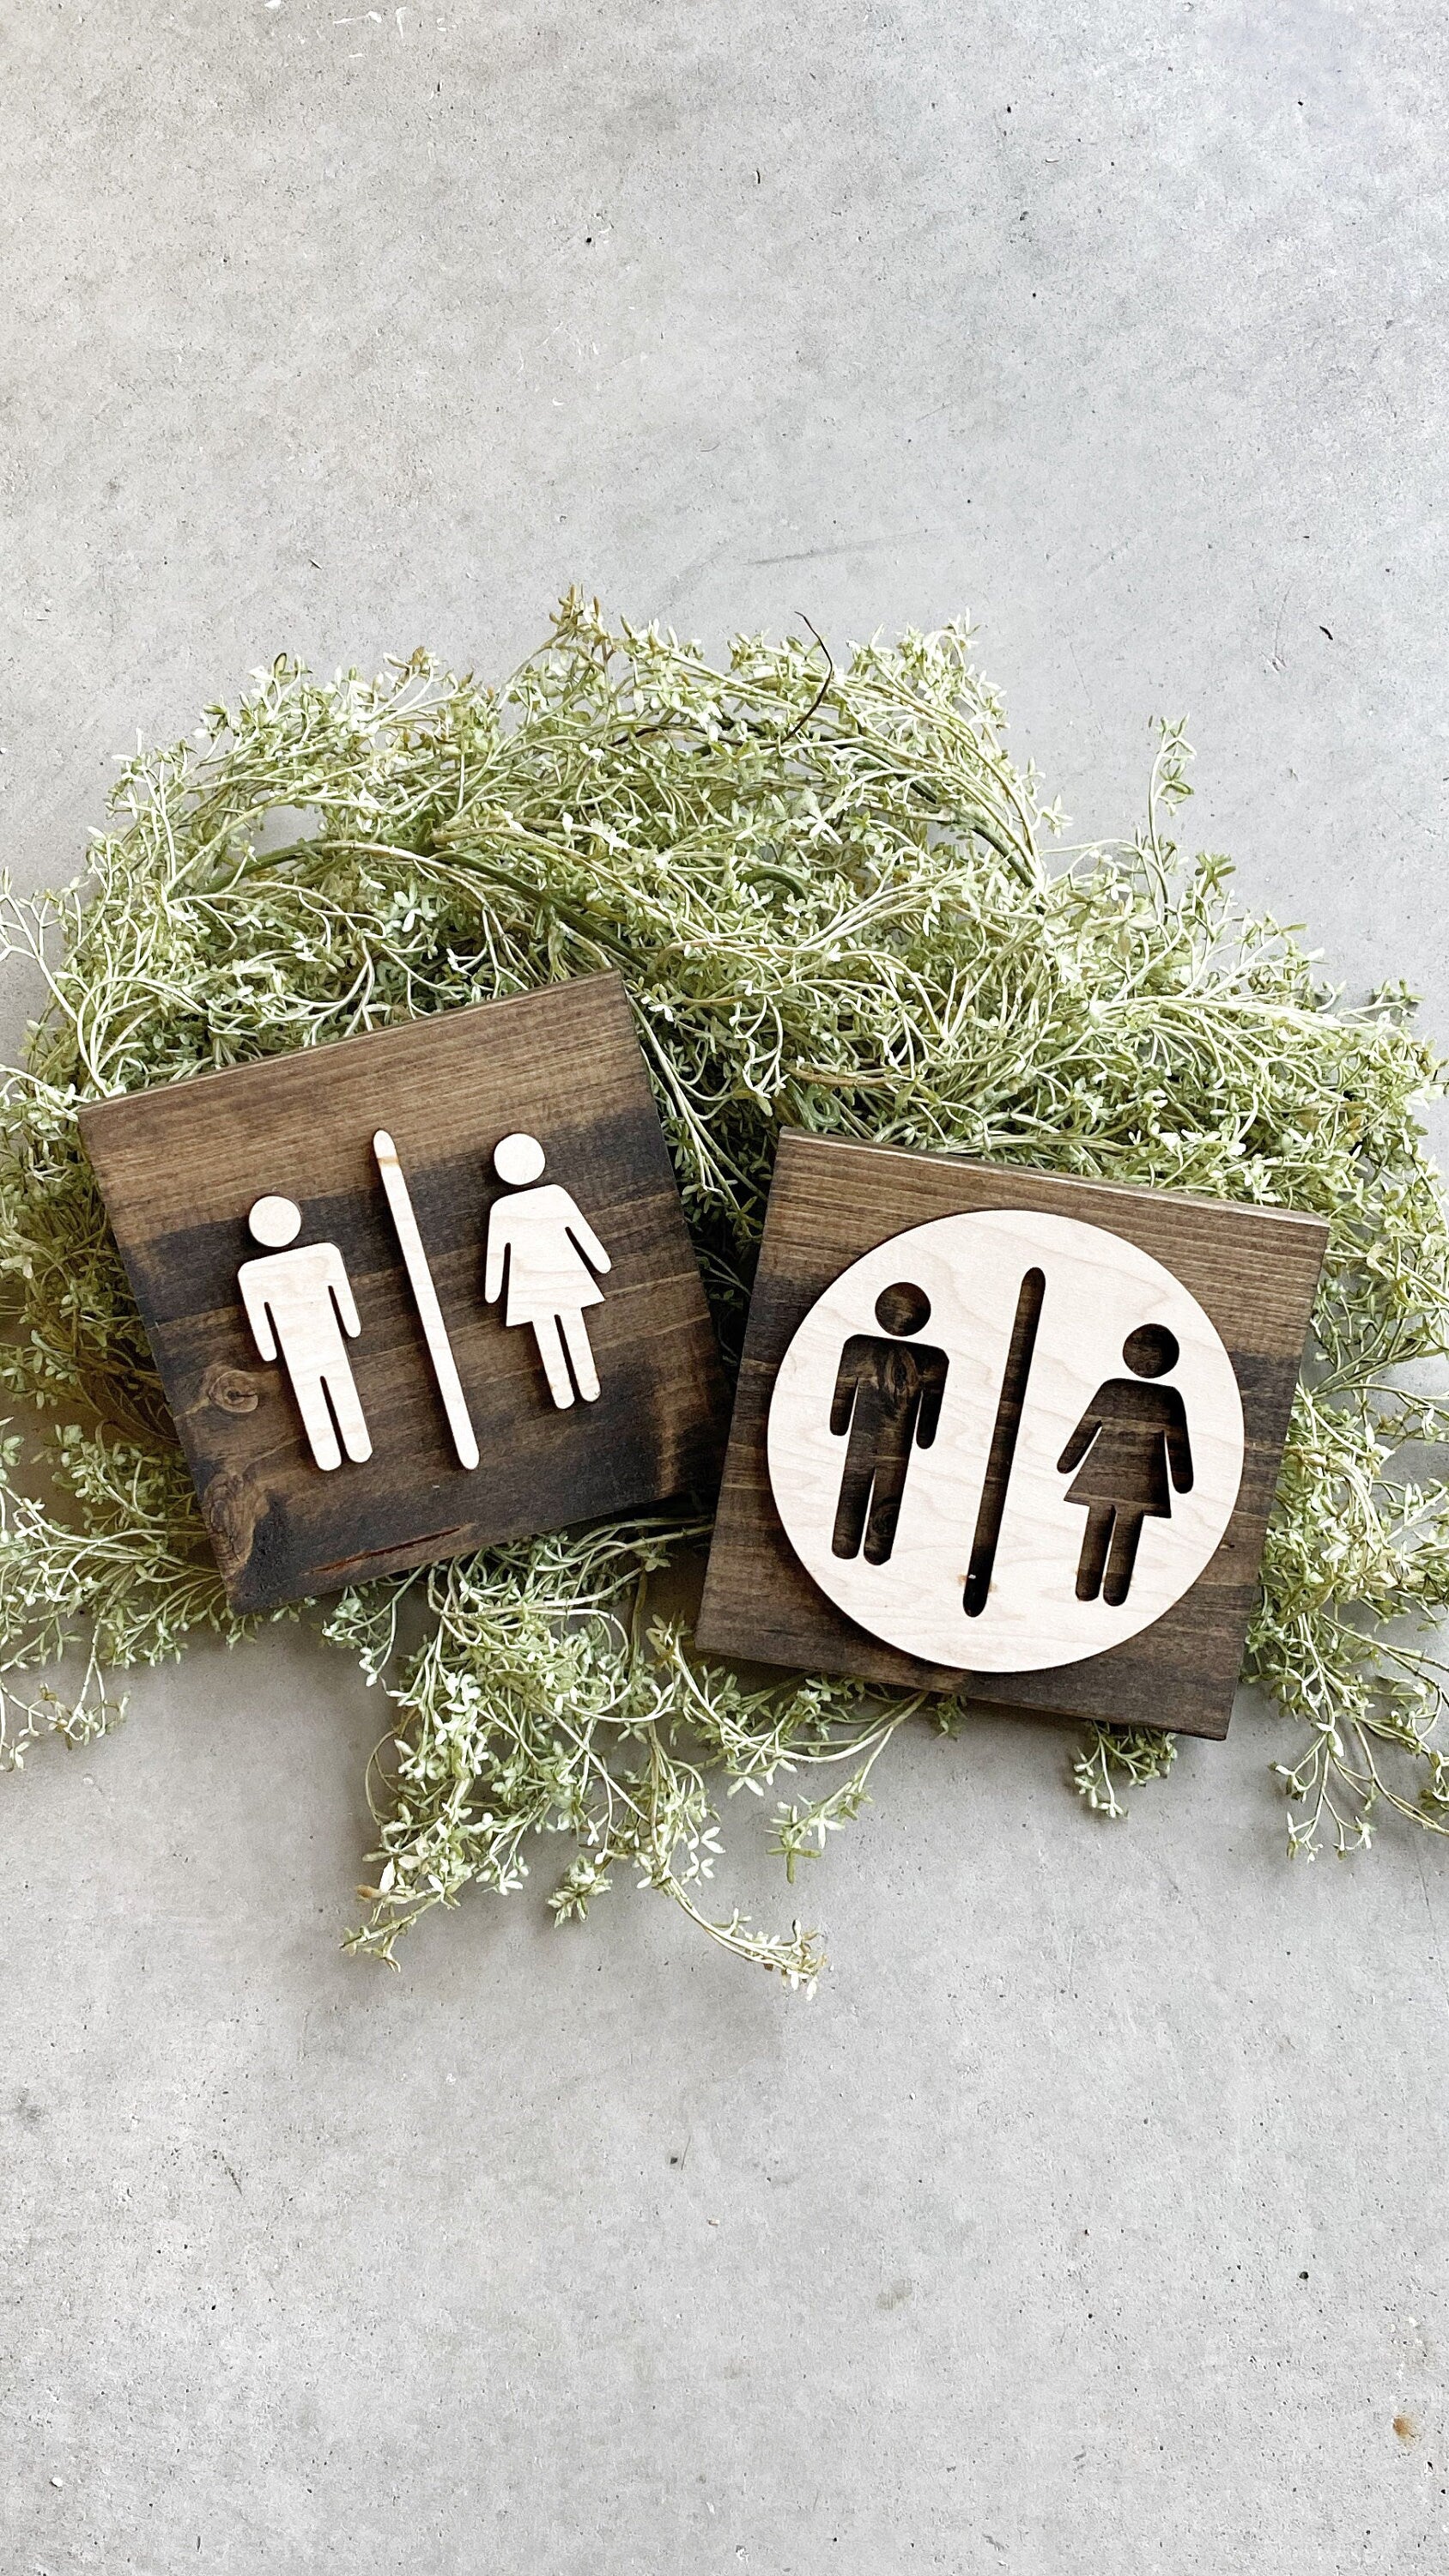 Bathroom People Sign, Unisex Restroom Sign, Small Tiered Tray Accent for Bathroom